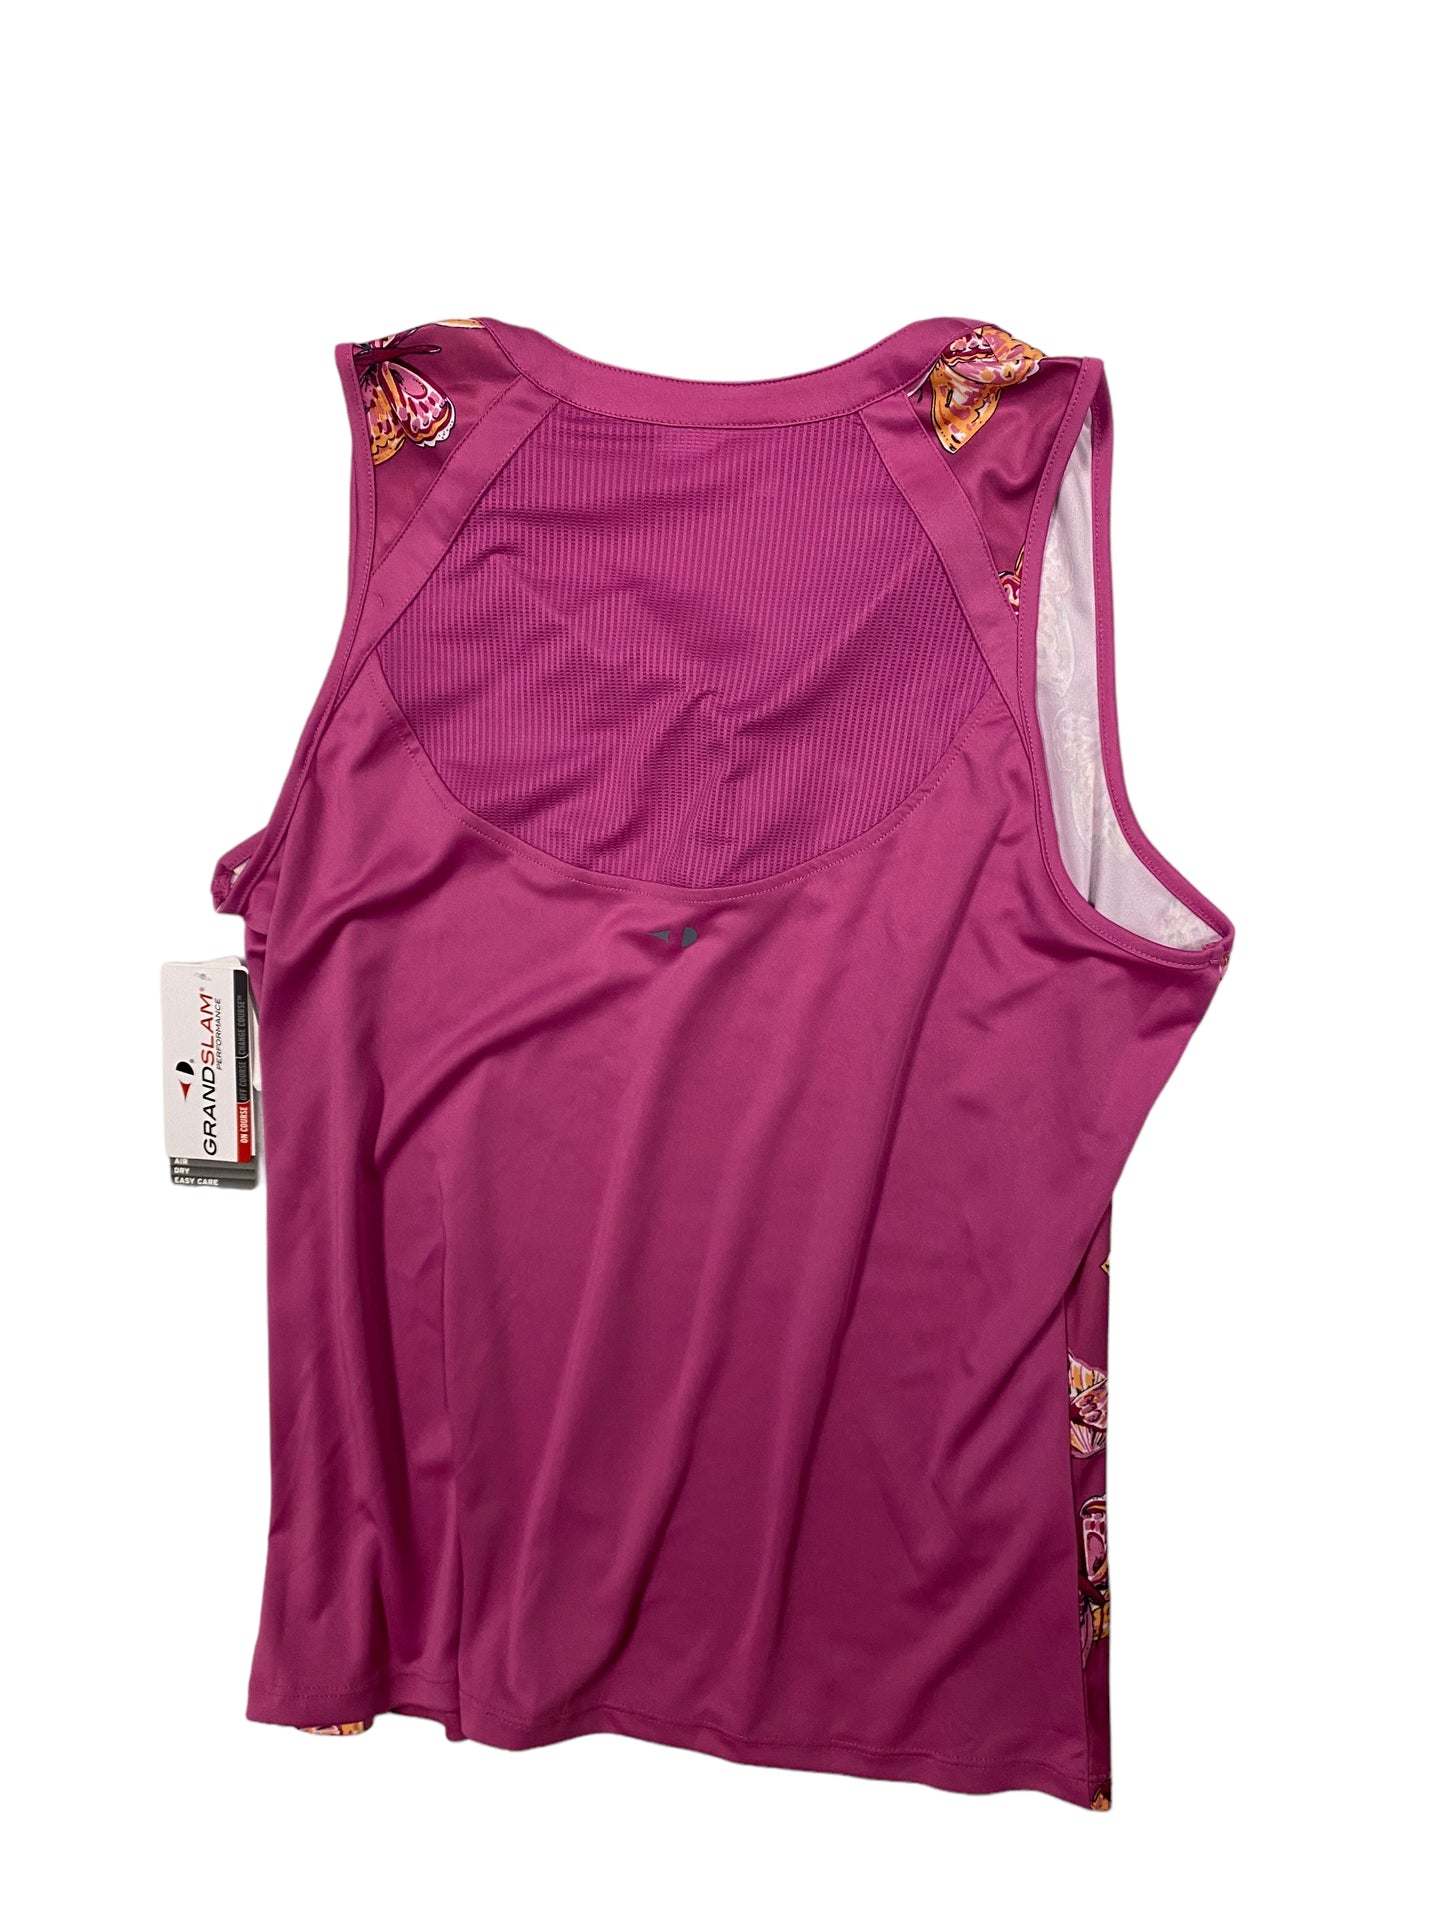 Pink Athletic Tank Top Cmc, Size Xl